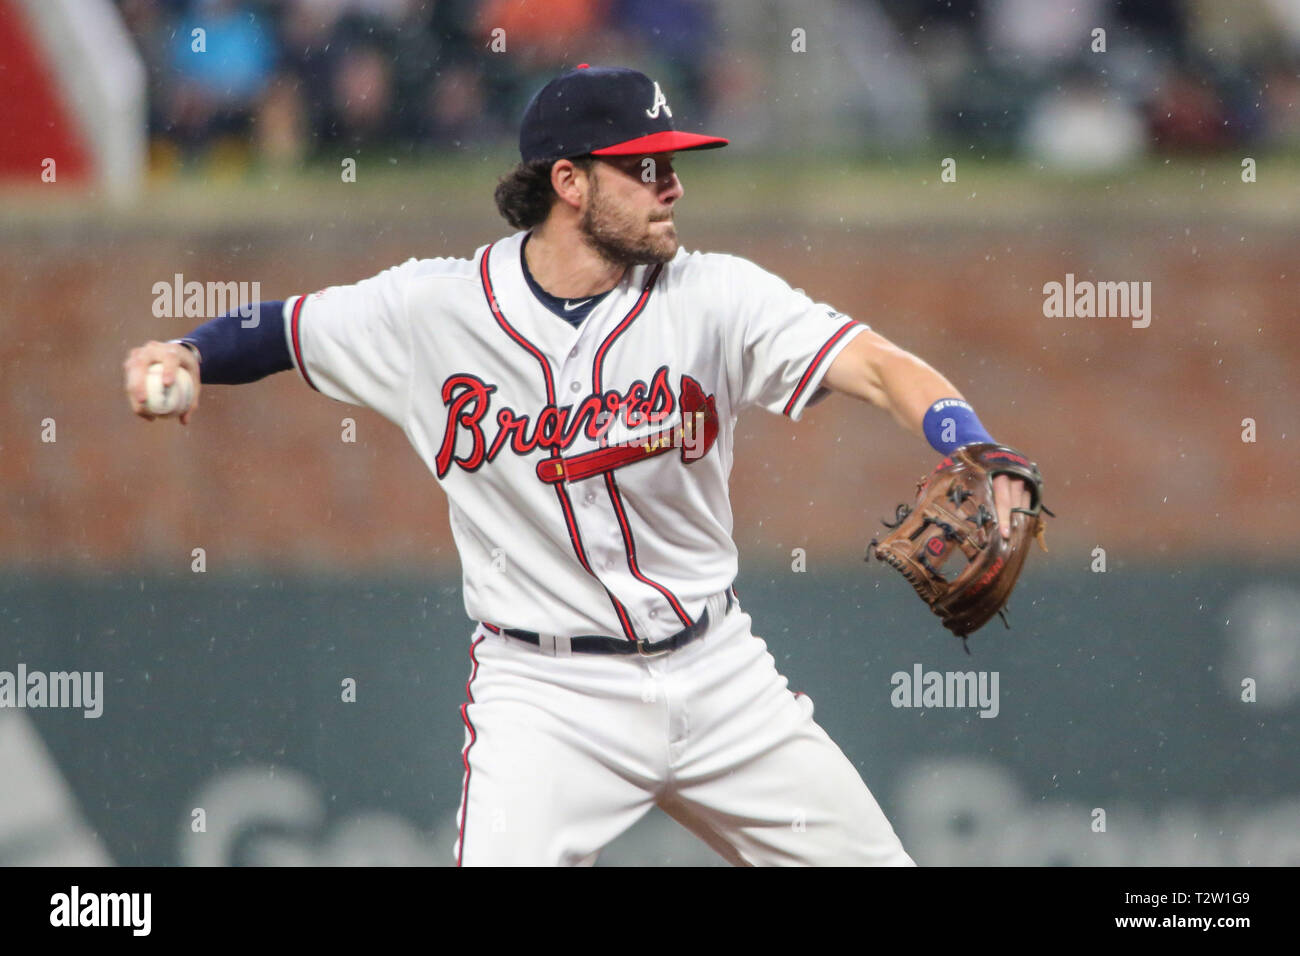 Atlanta, GA, USA. 4th Apr, 2019. Atlanta Braves shortstop Dansby Swanson  (7) throws a runner out at first during MLB action between the Chicago Cubs  and the Atlanta Braves at SunTrust Park